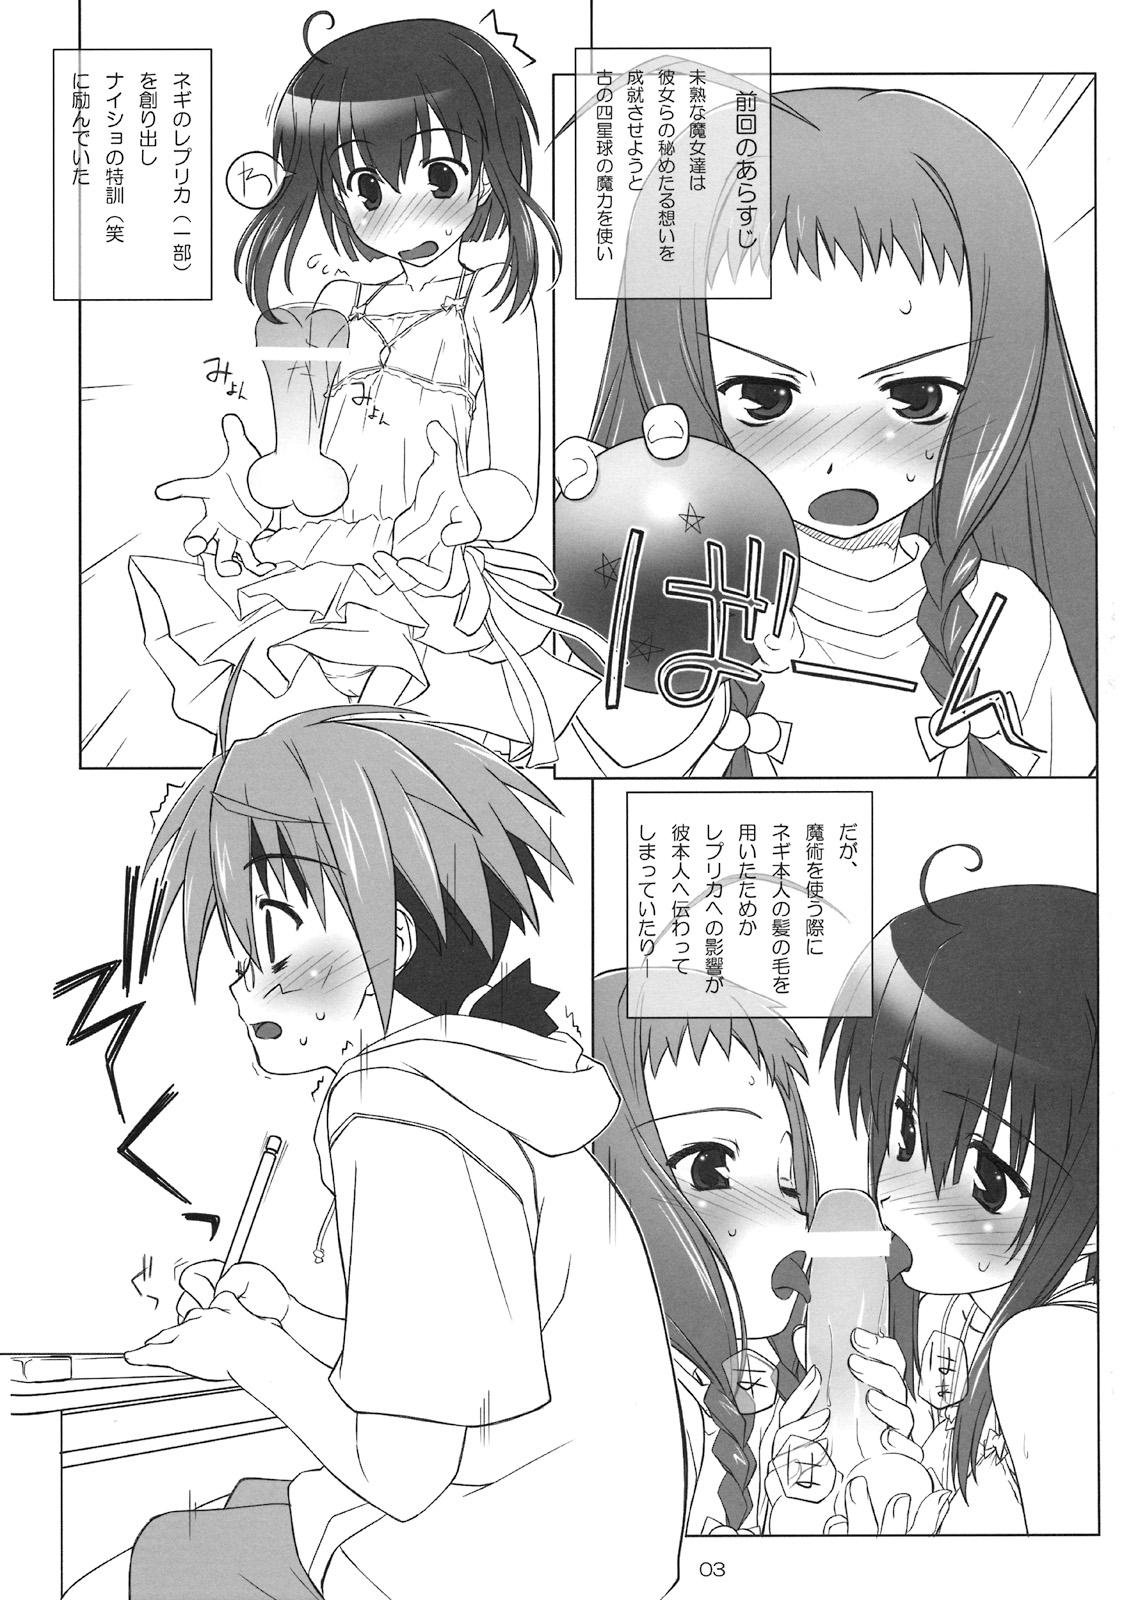 Outdoors Dear My Little Witches 2nd - Mahou sensei negima Bokep - Page 2